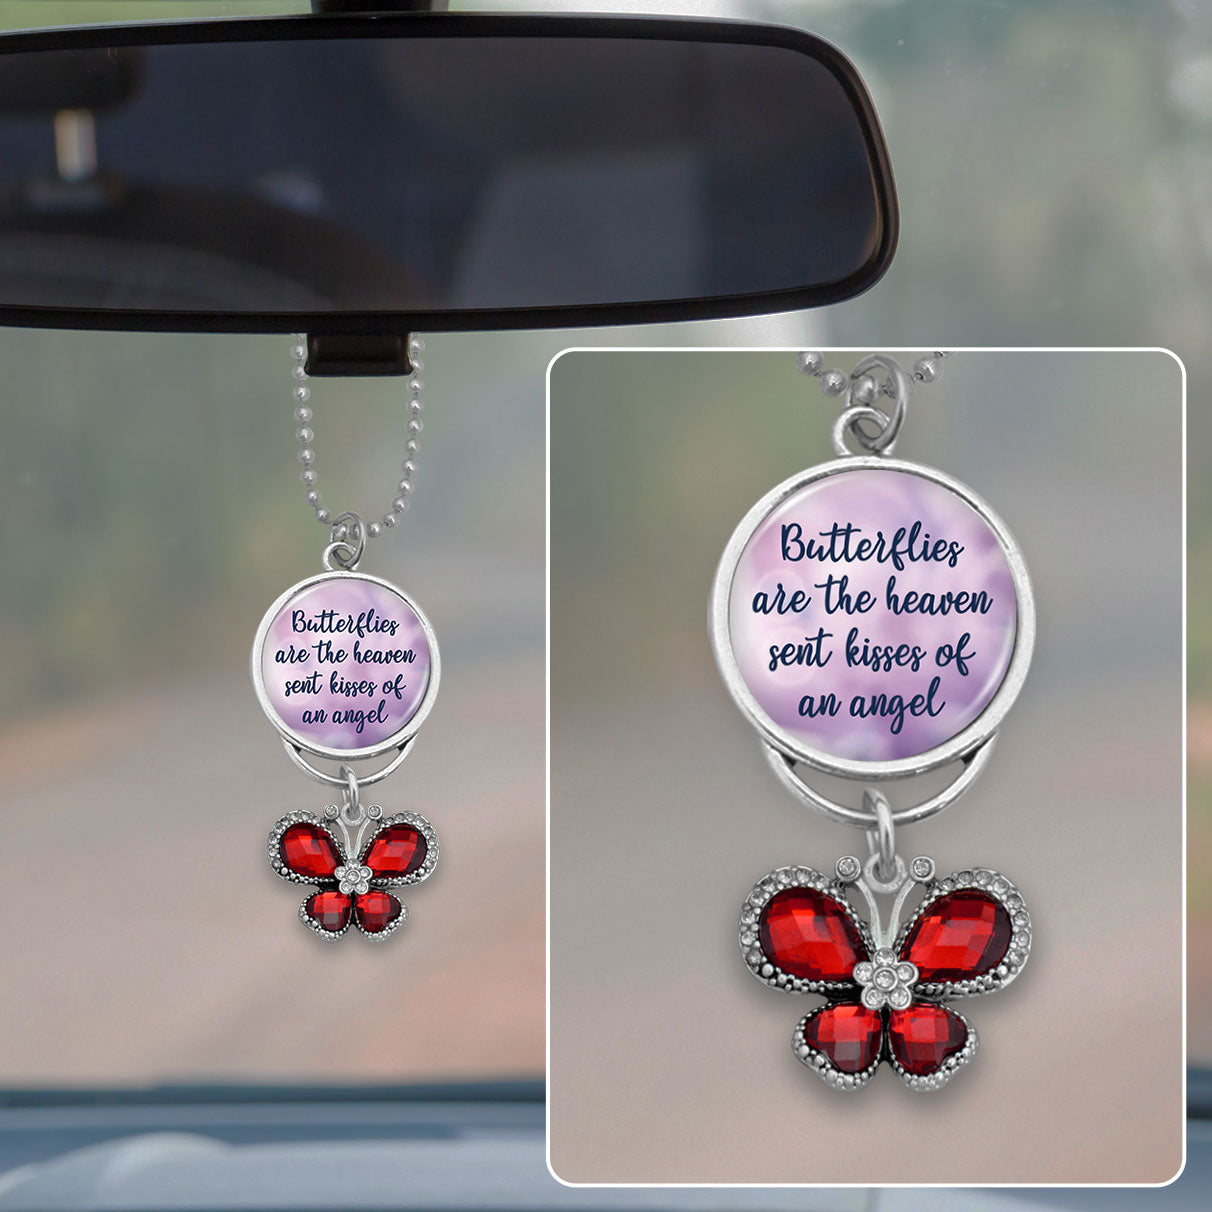 Butterflies Are The Heaven Sent Kisses Of An Angel Crystal Butterfly Rearview Mirror Charm